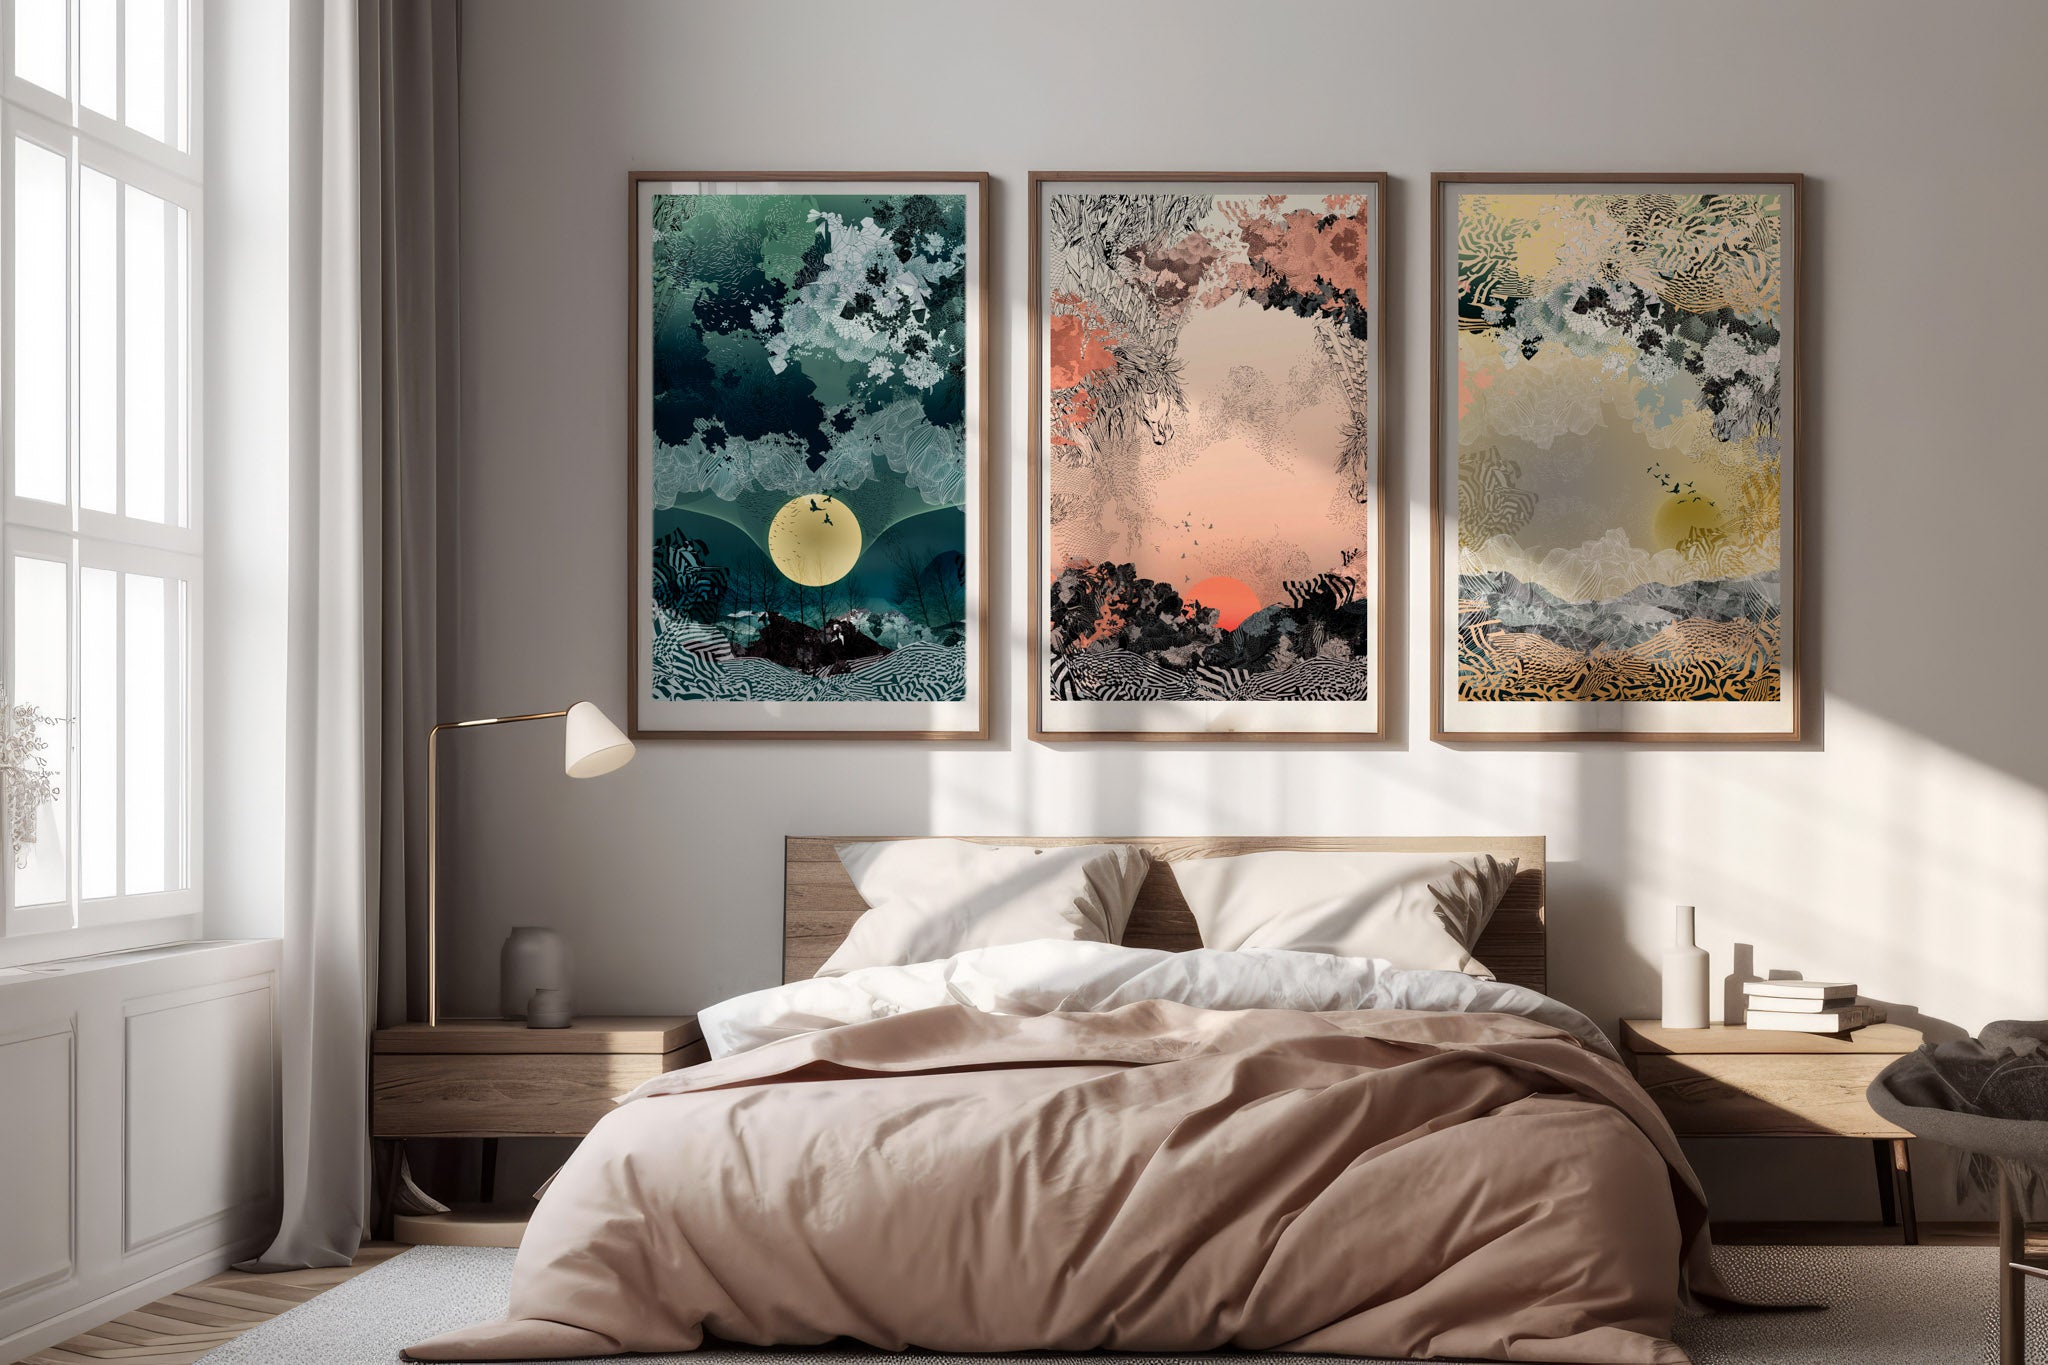 A mock up of a giclee print with Sunrise design in oranges and blacks in a wood frame, above a bed